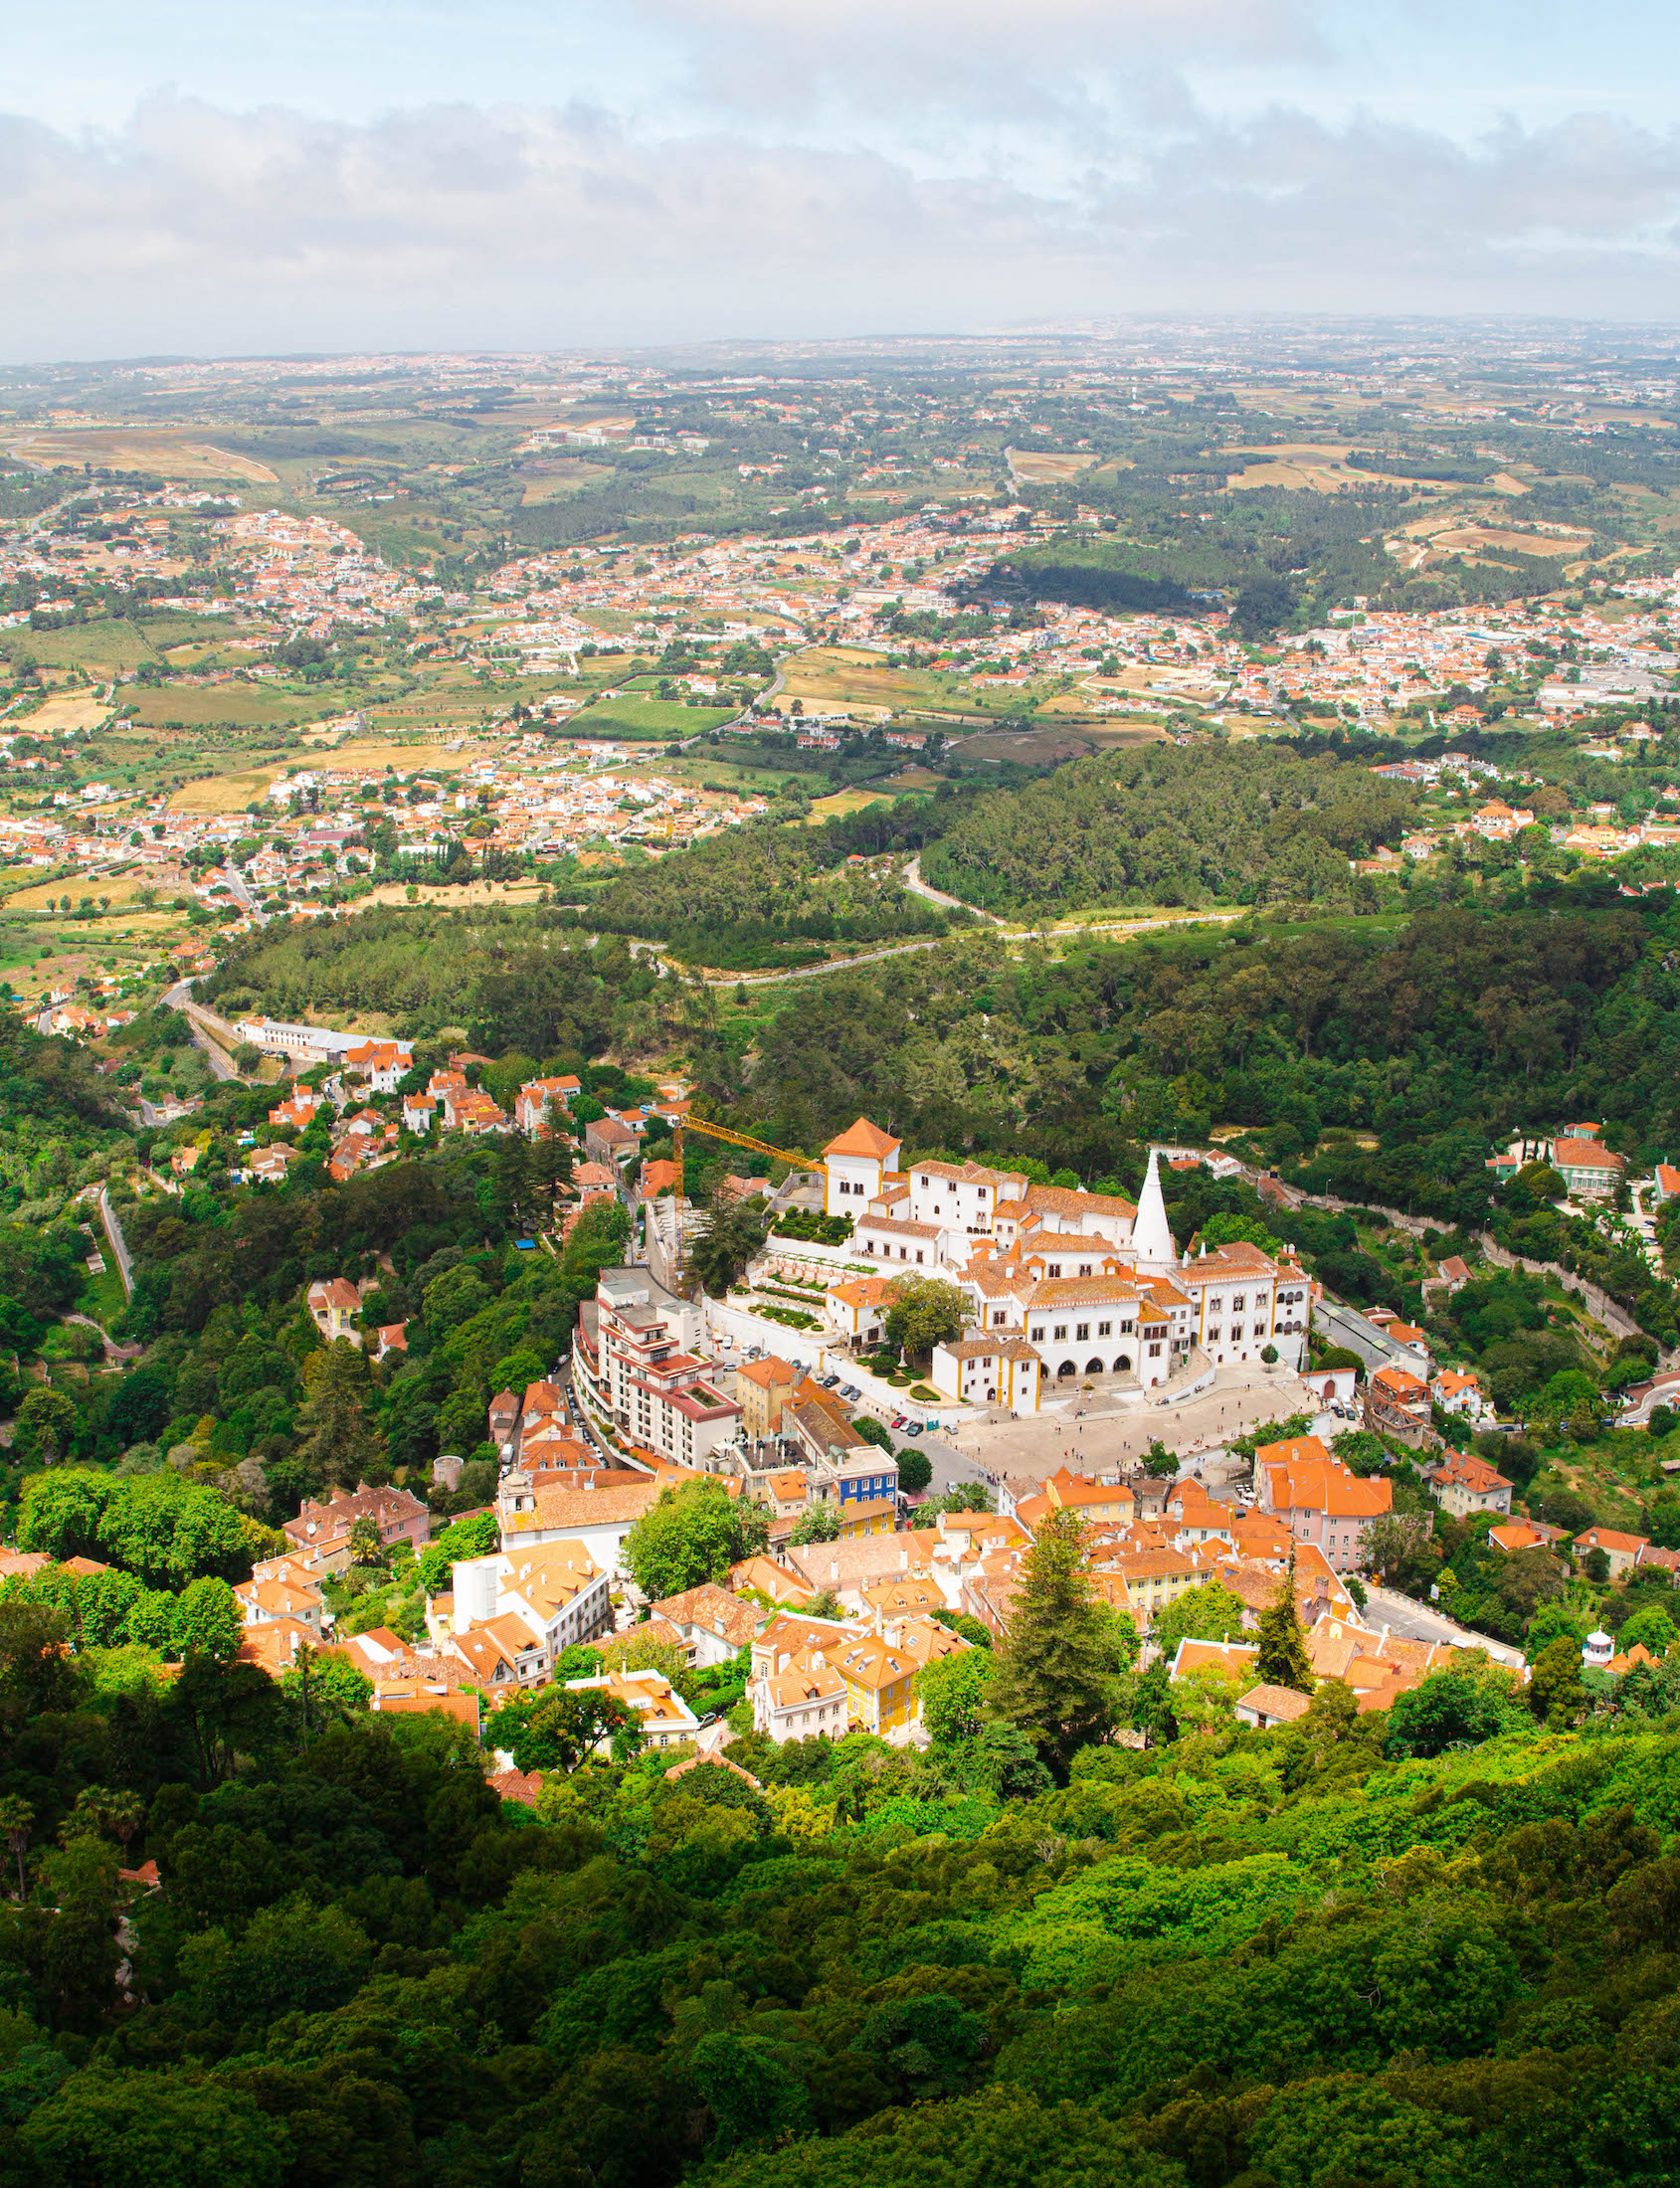 Sintra: planning the perfect visit to this fairytale place